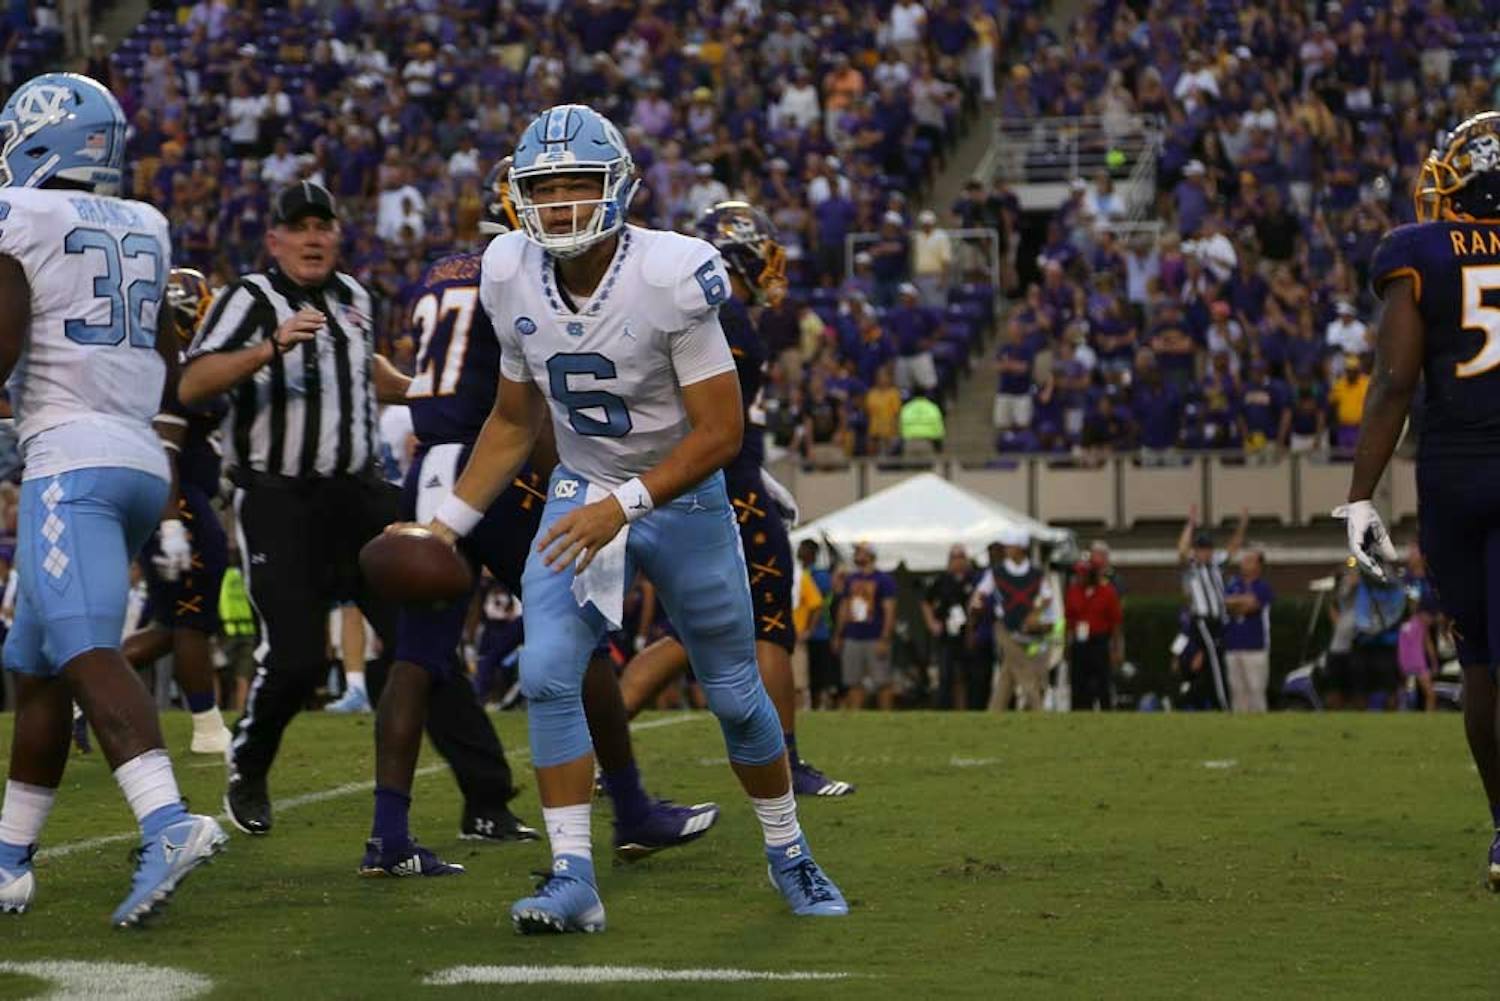 UNC first-year quarterback Cade Fortin holds the ball in his hand in a 41-19 loss to ECU in Greenville on Sept. 8.